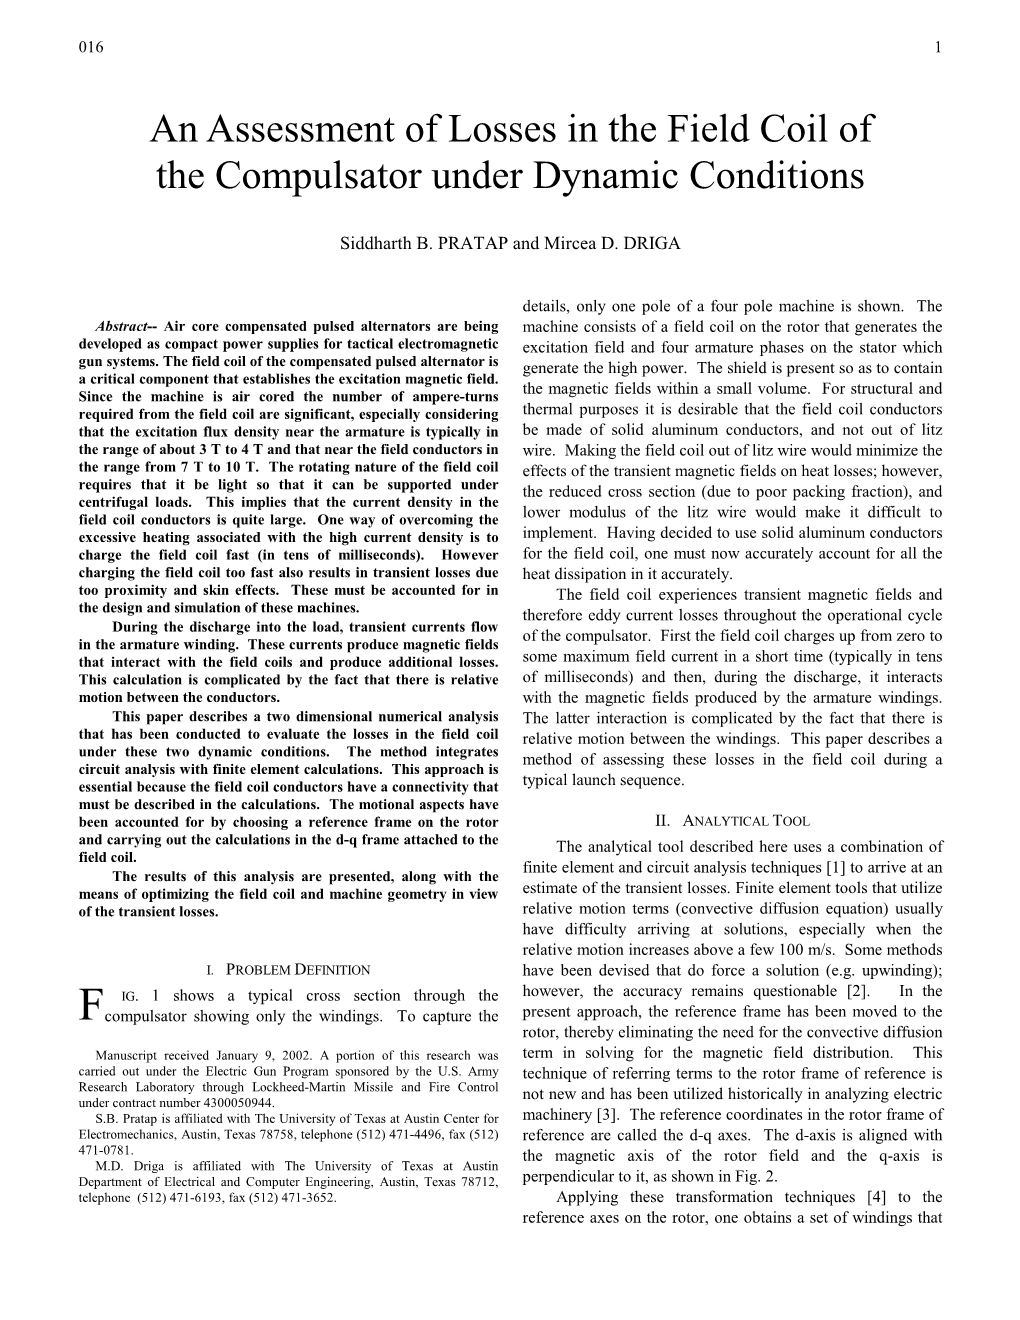 An Assessment of Losses in the Field Coil of the Compulsator Under Dynamic Conditions